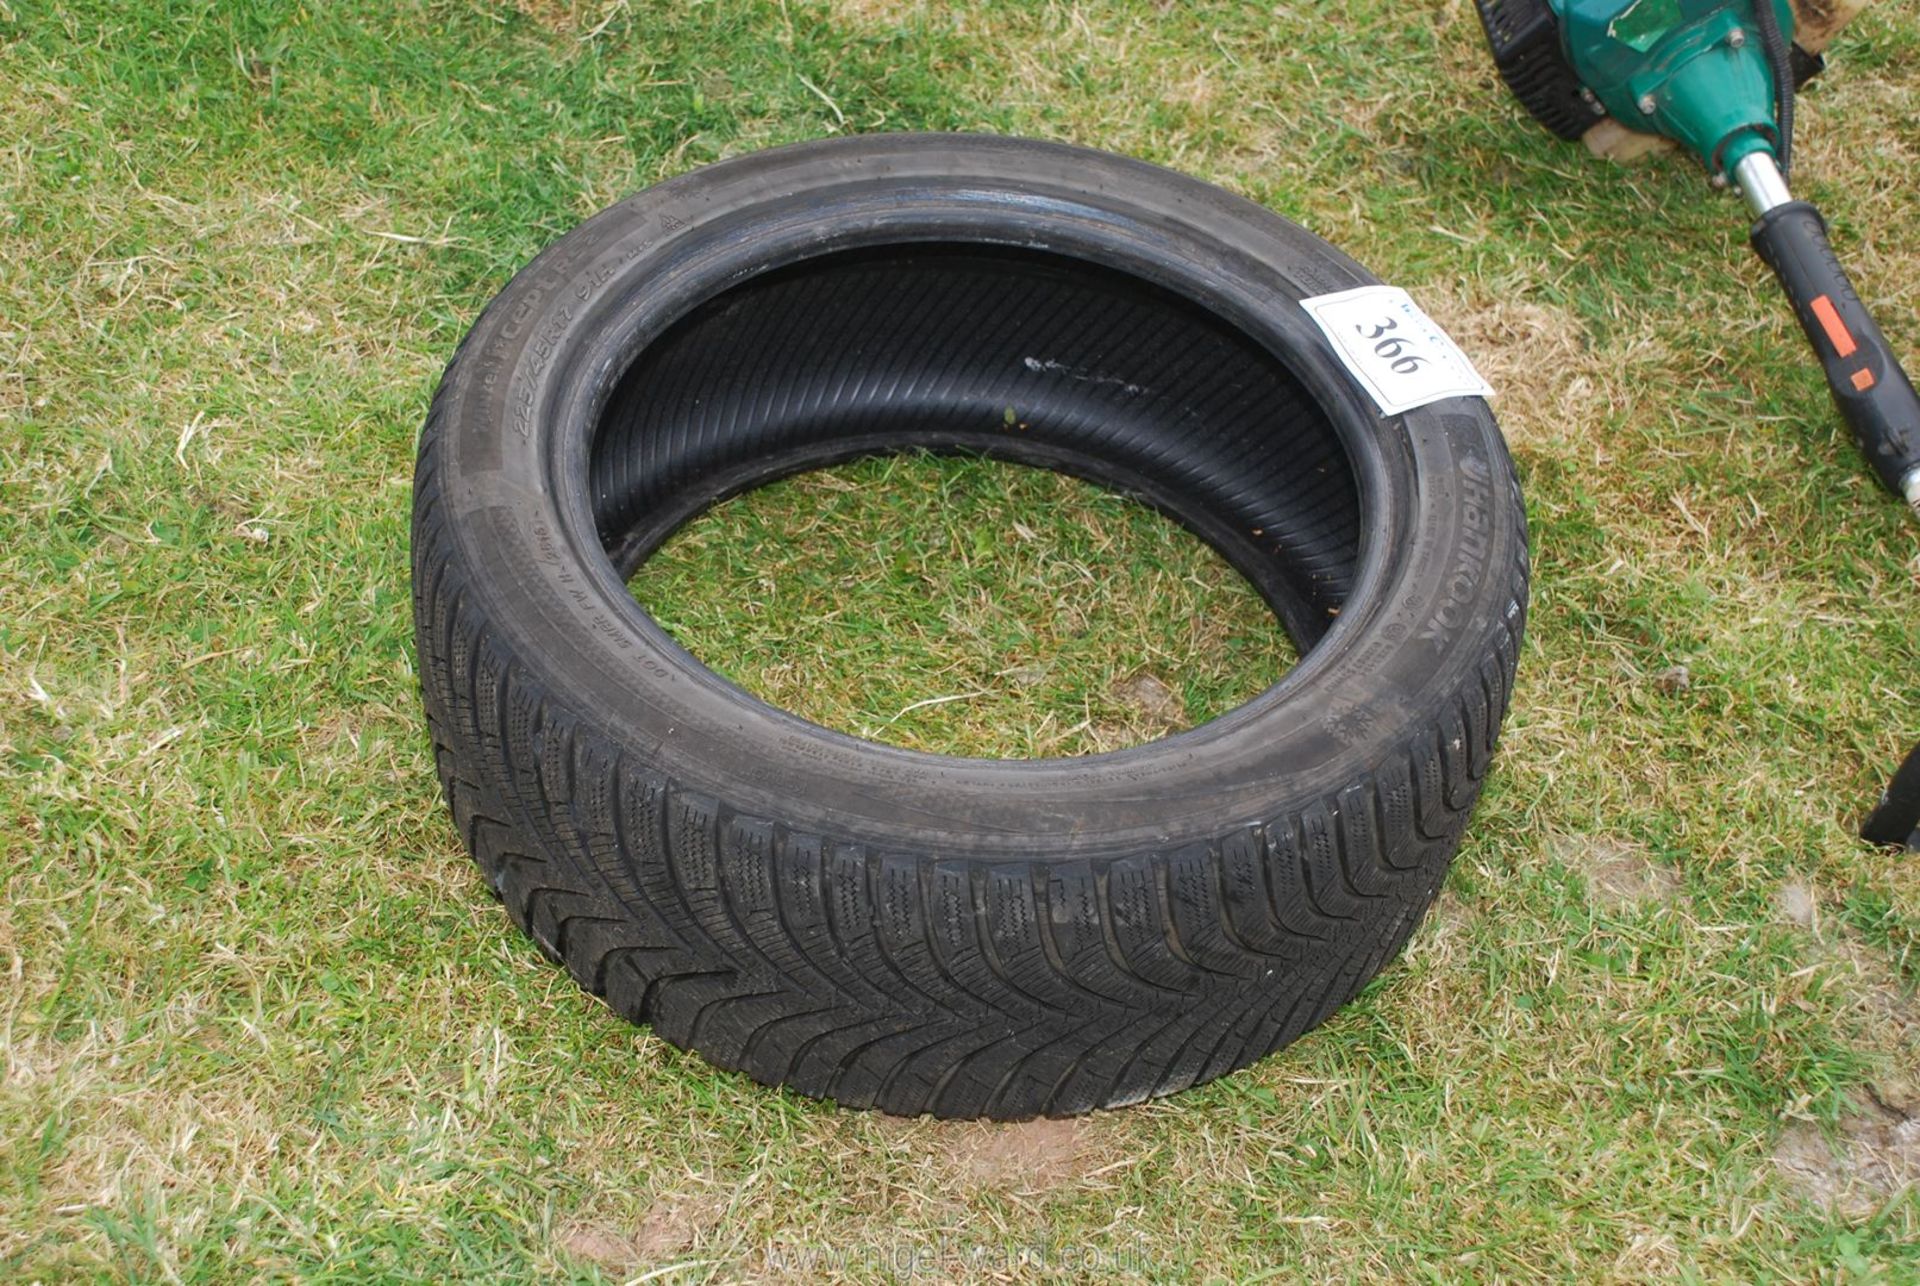 A 225/45 R17 tyre.